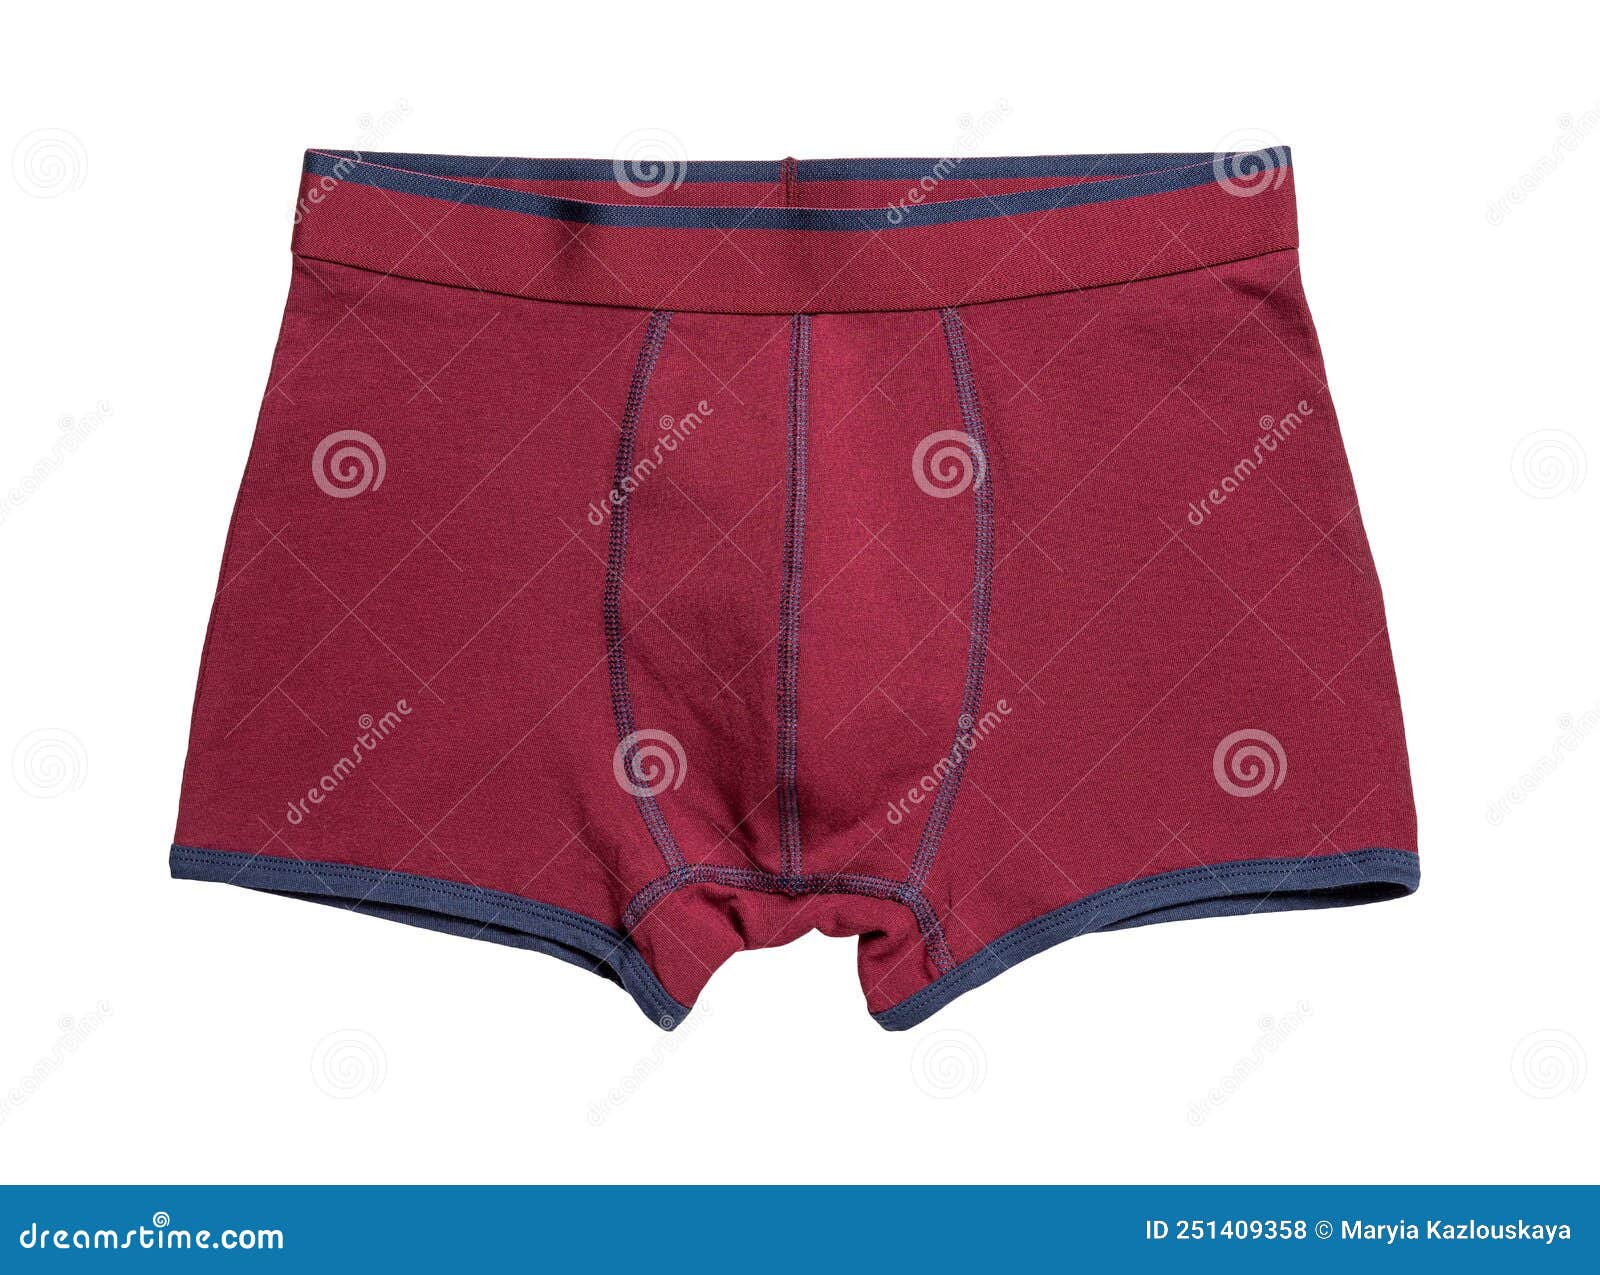 https://thumbs.dreamstime.com/z/men-red-boxers-cutout-male-tight-underwear-cotton-elastane-isolated-white-background-new-boxer-briefs-burgundy-color-251409358.jpg